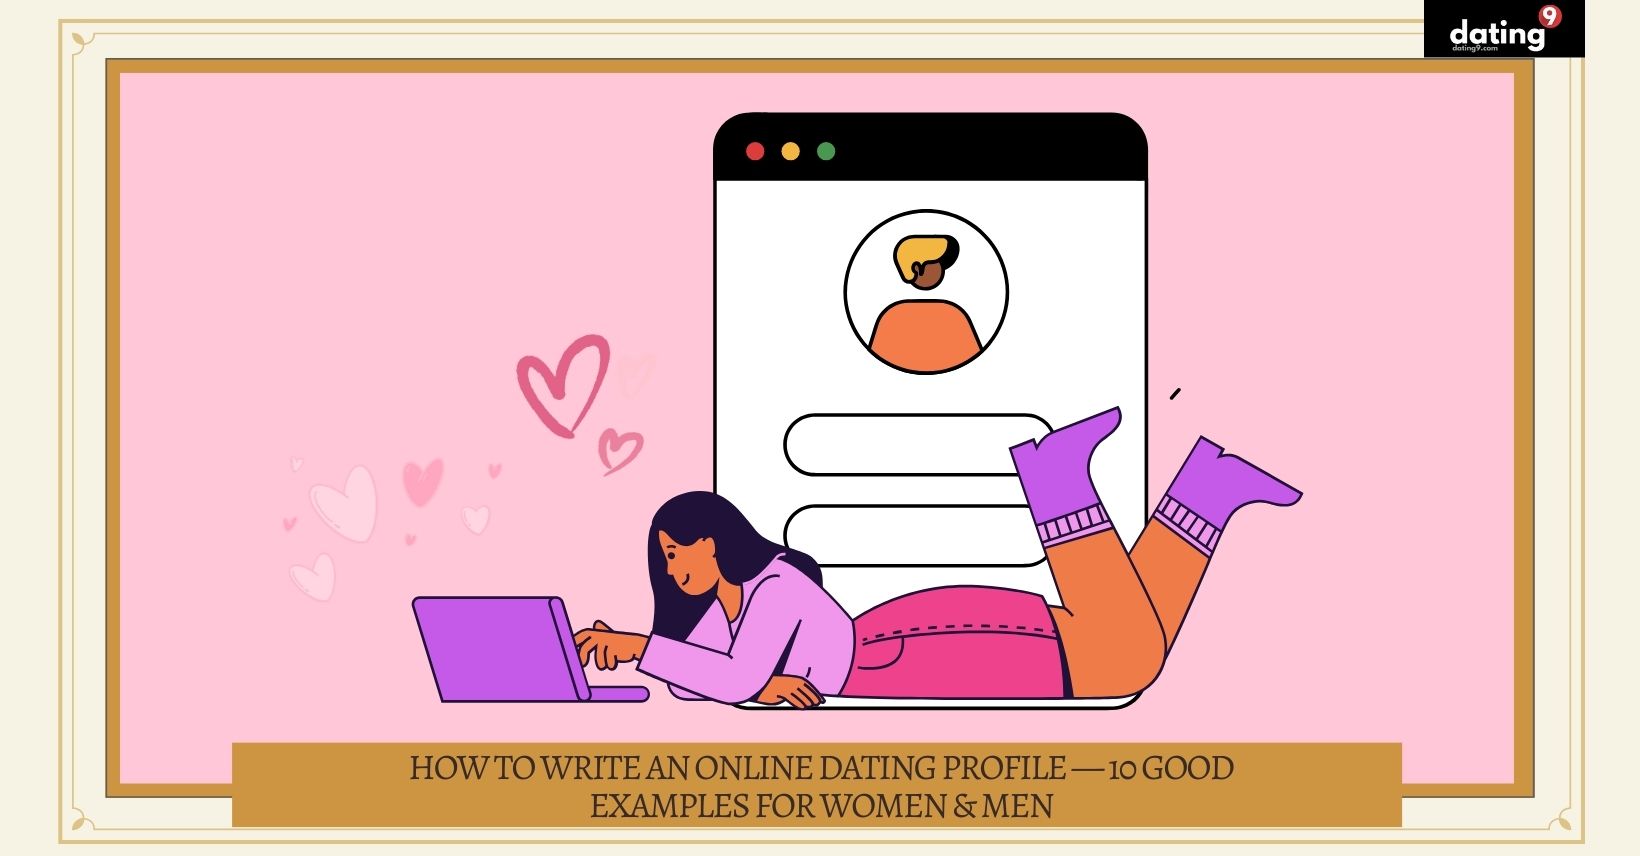 A playful illustration of a young woman lying down and using her laptop, indicative of tips for crafting captivating online dating profiles.